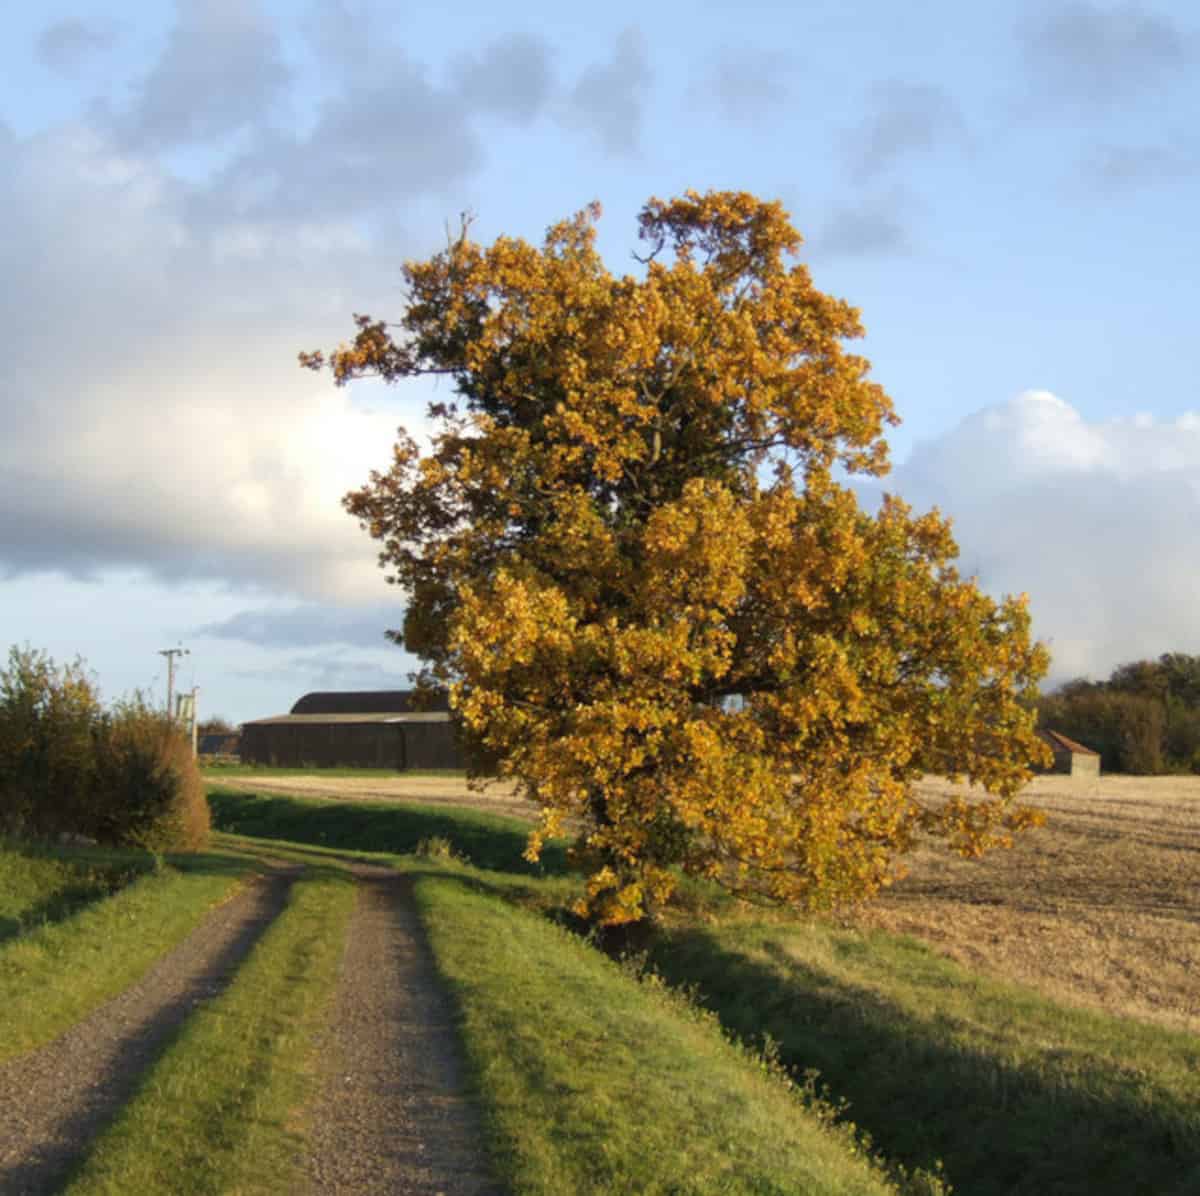 Wide angle view of a golden oak tree at edge of farmers field.